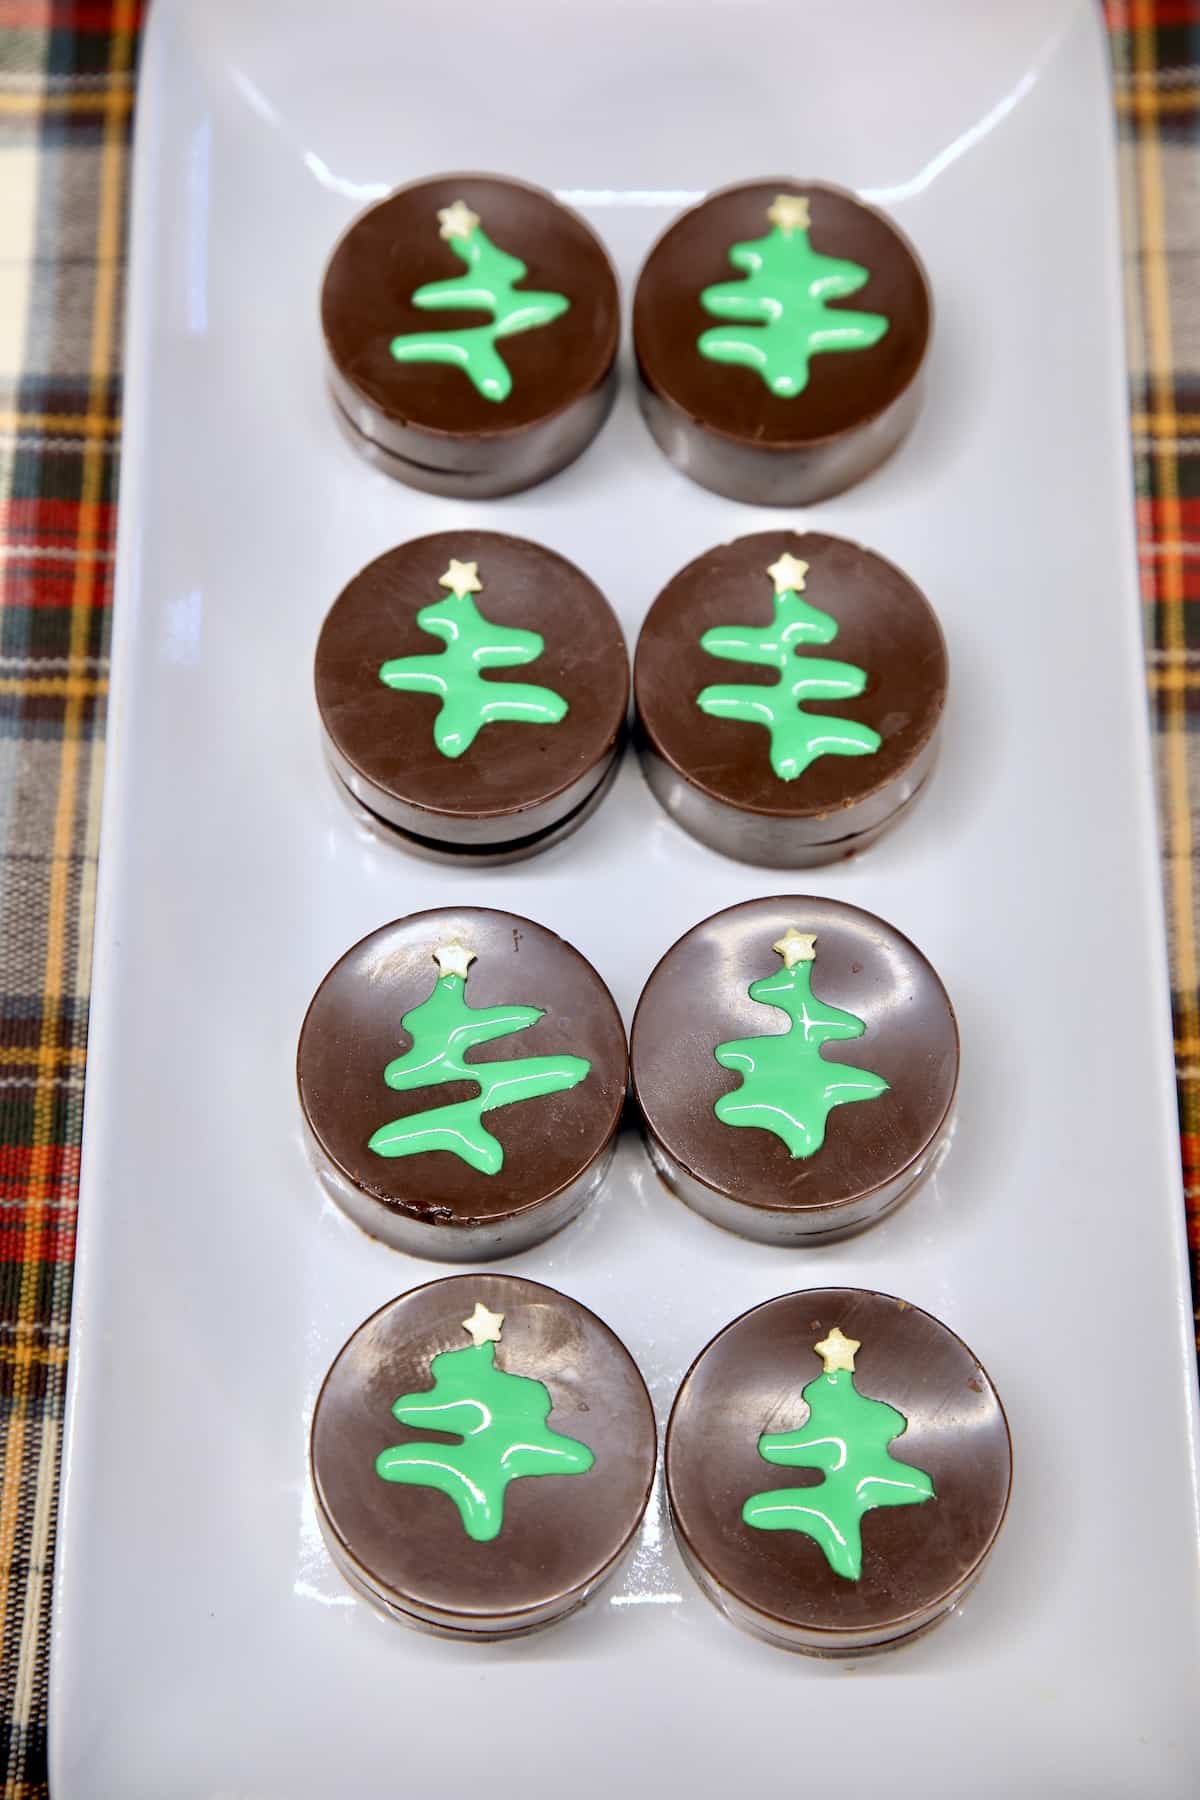 Chocolate Covered Oreos with Christmas tree icing.